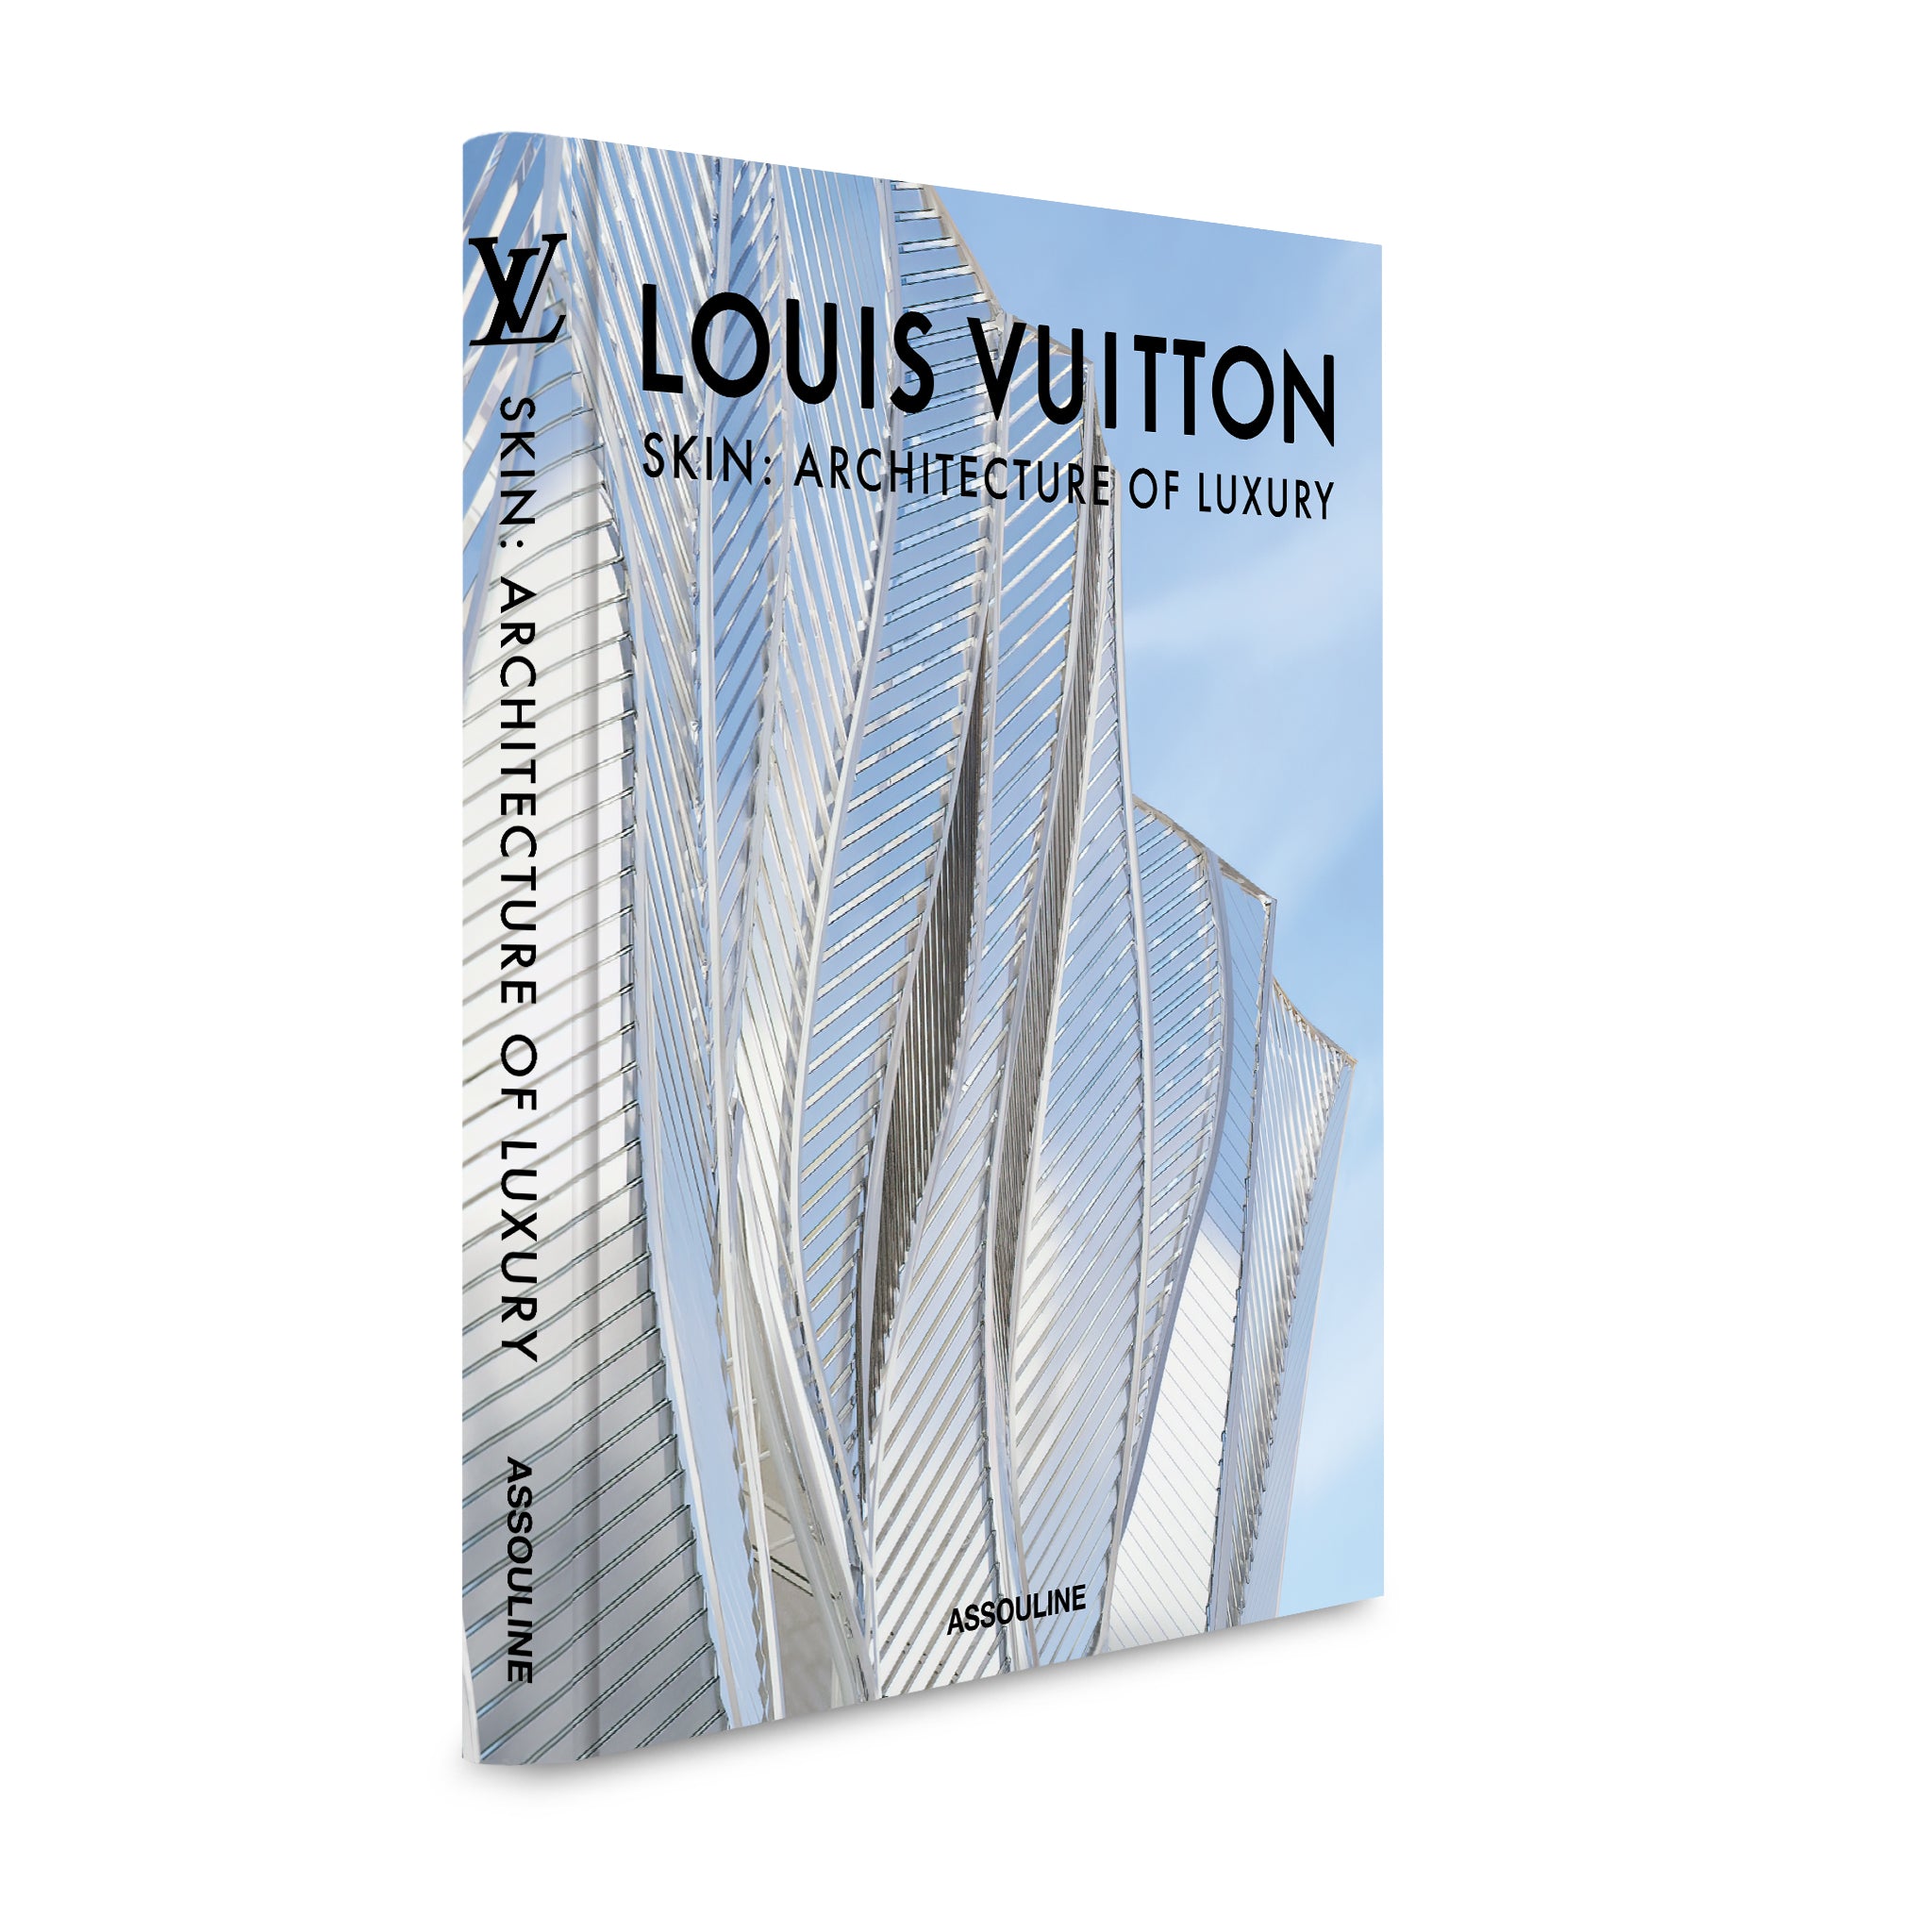 Louis Vuitton Skin: Architecture of Luxury (Beijing Edition) – Presley Paige